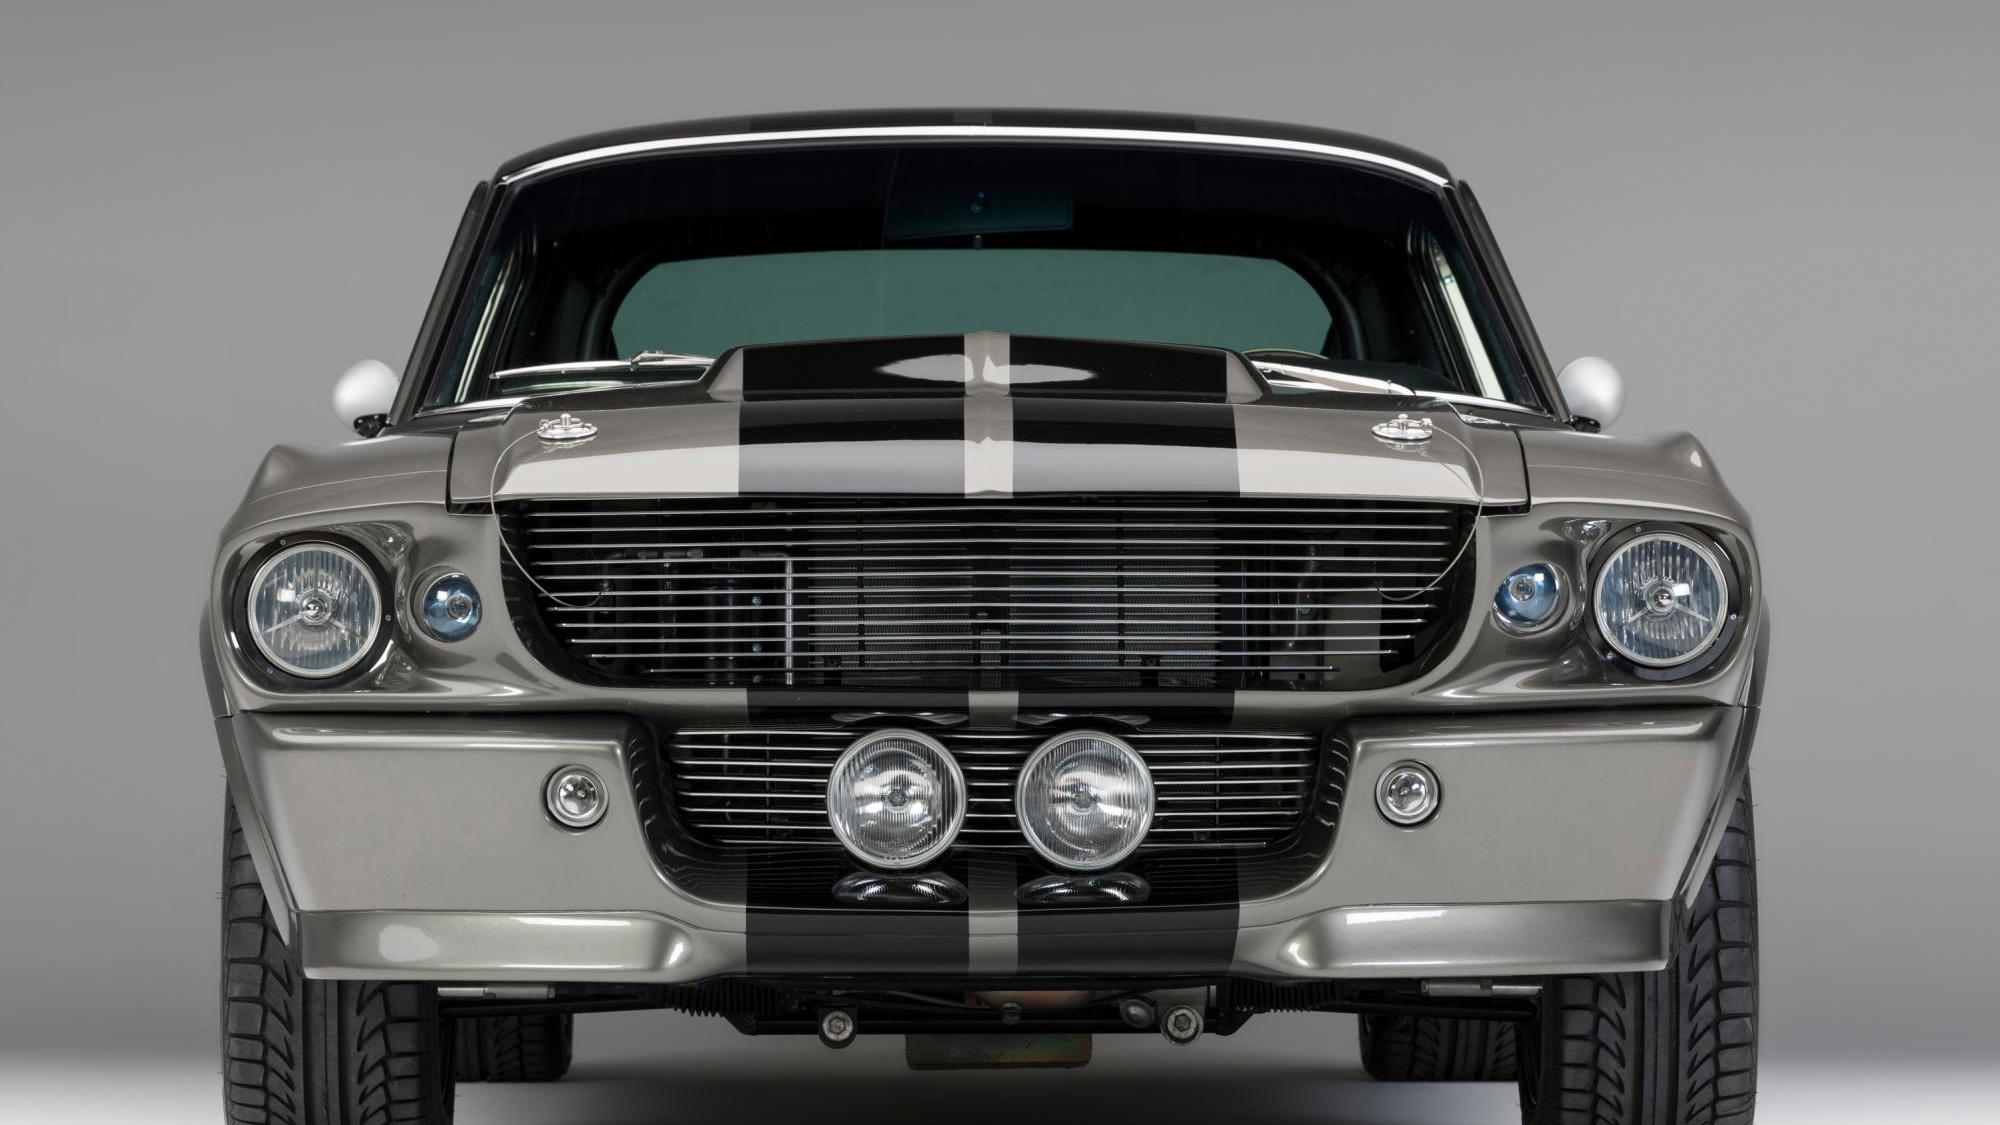 Brand New Muscle Car Shelby GT500 "Eleanor" replica